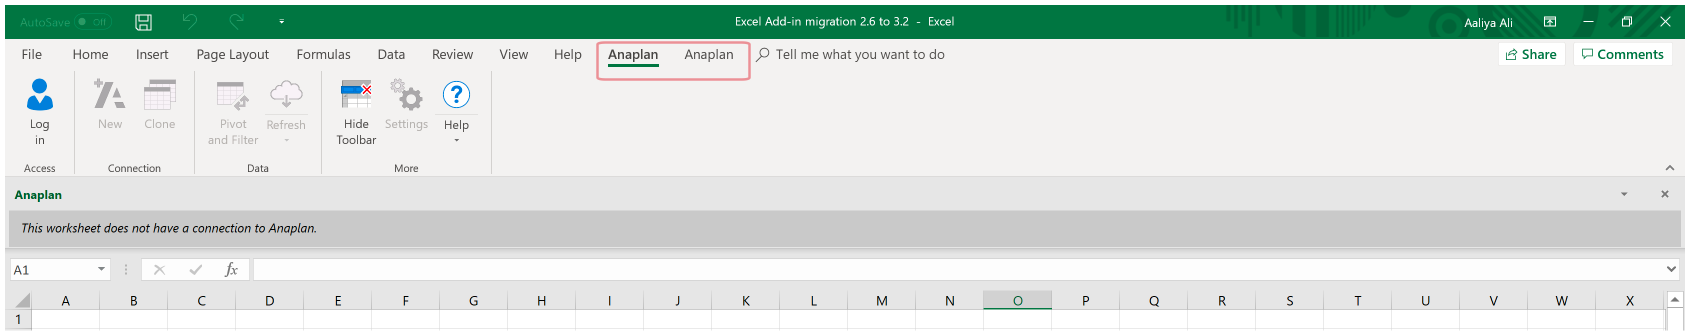 The selected Anaplan tab in this image is for Excel Add-in version 3.2 and displays version 3.2's ribbon. The unselected Anaplan tab is for Excel Add-in version 2.6.